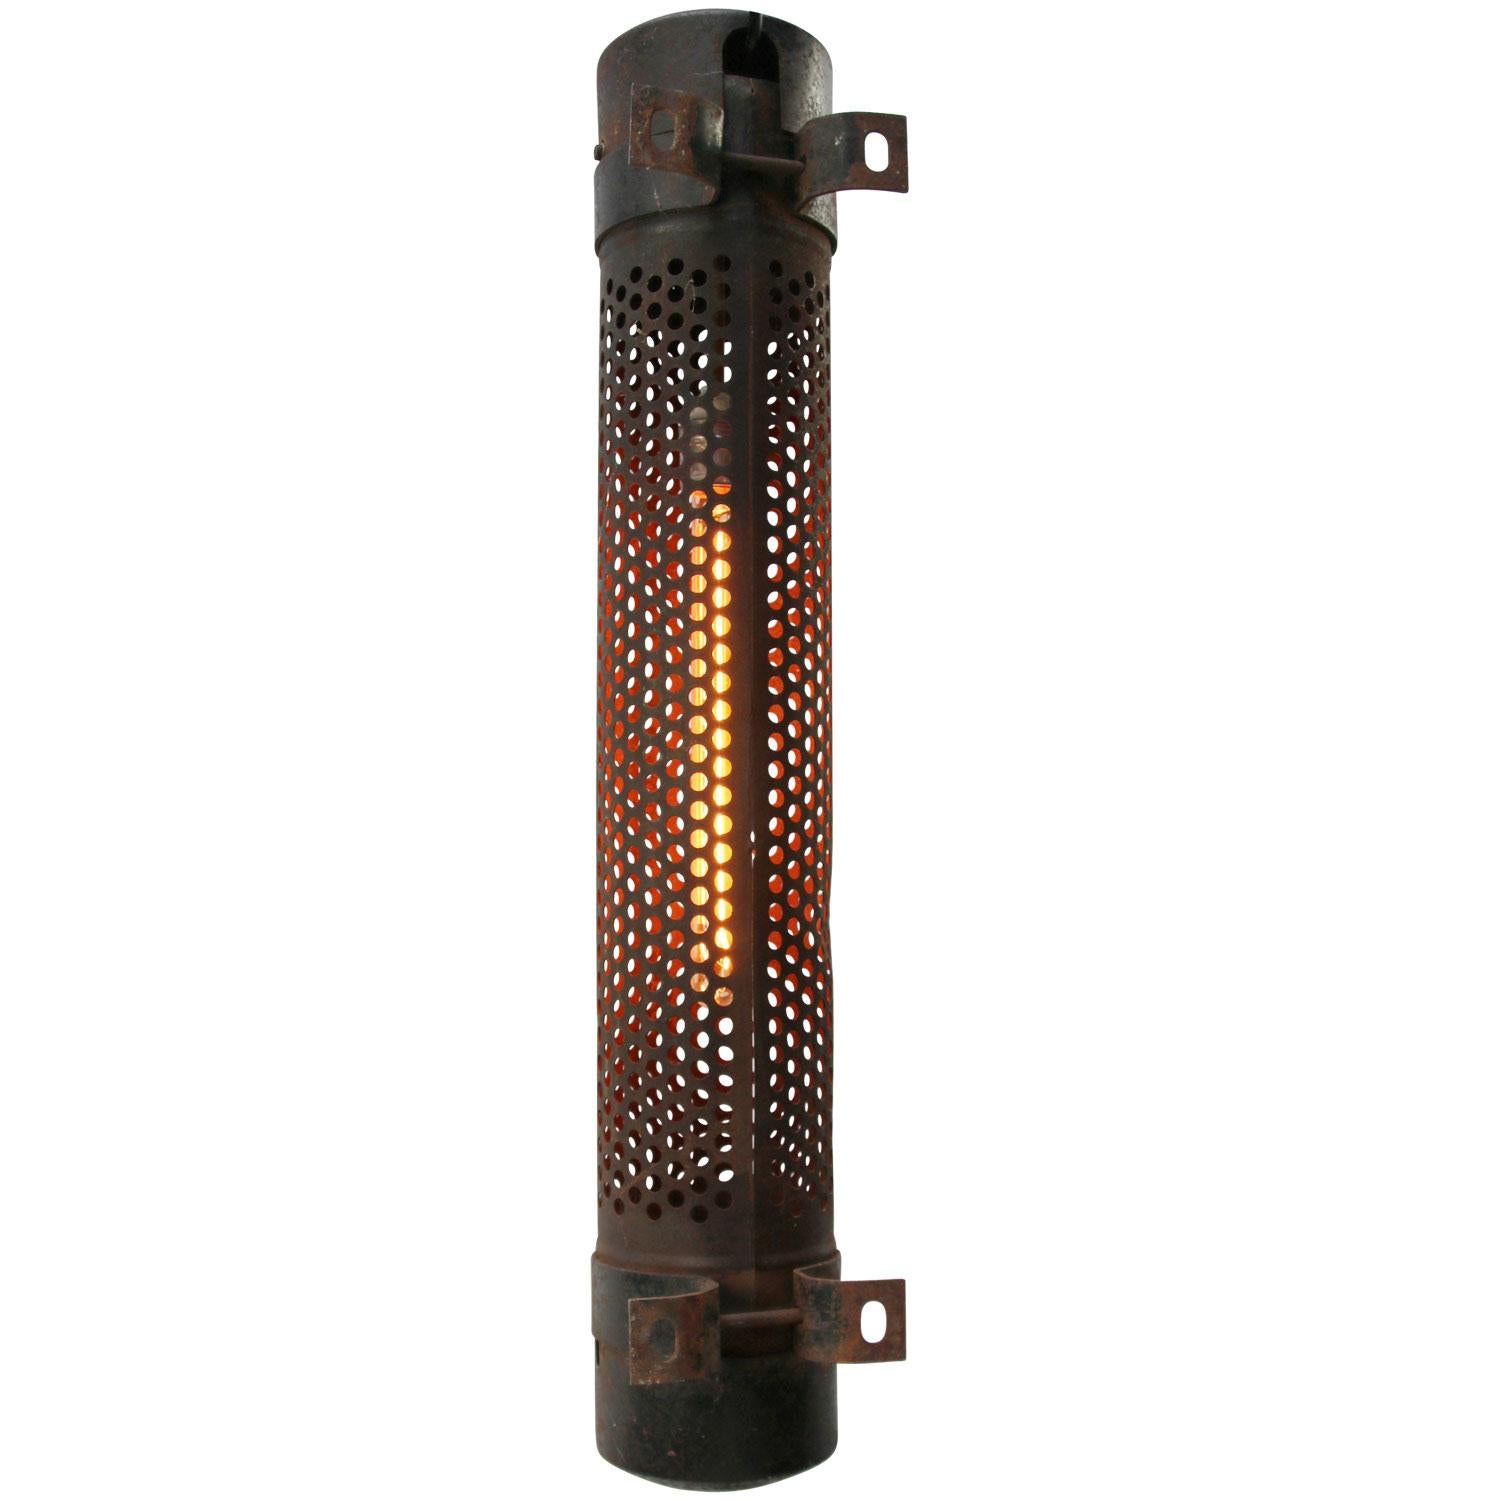 Old vintage round wall / ceiling fixture.
Black / rust iron

Weight 3.0 kg / 6.6 lb

Priced per individual item. All lamps have been made suitable by international standards for incandescent light bulbs, energy-efficient and LED bulbs. E26/E27 bulb